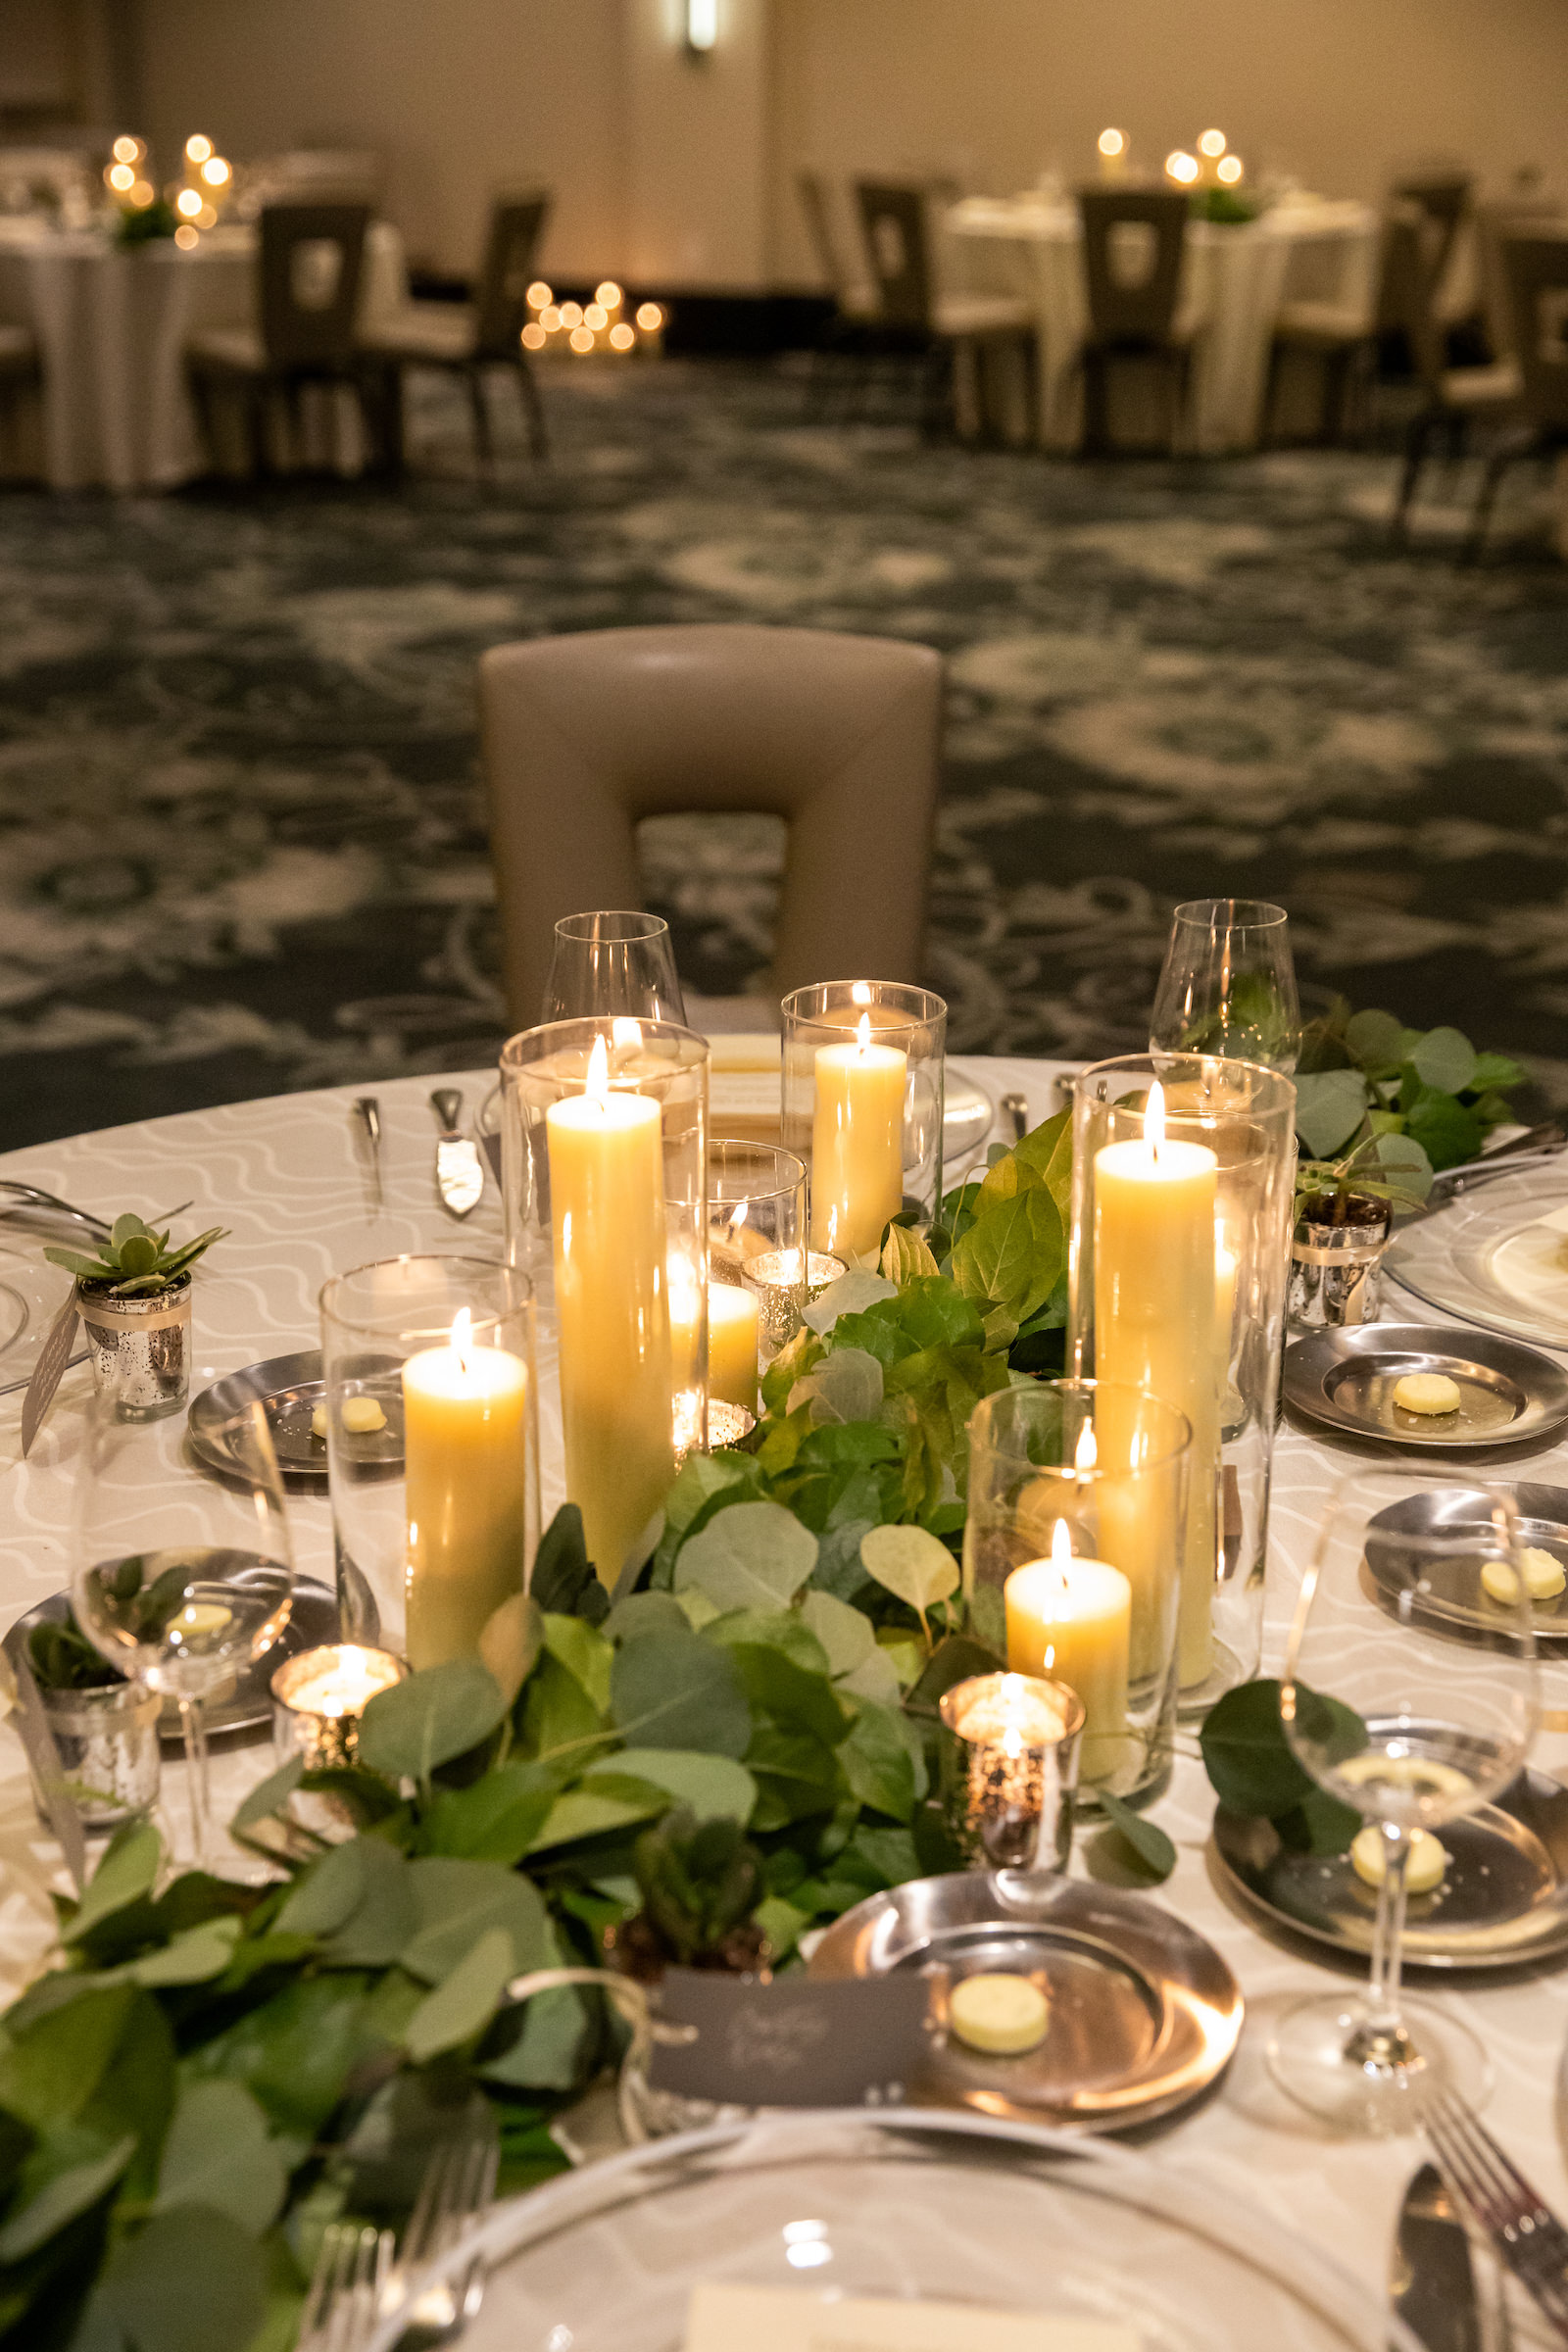 America personal Dinkarville Elegant Timeless Wedding Reception Decor, Greenery Eucalyptus Garland, Hurricane  Vase Candles | Tampa Bay Wedding Planner Elegant Affairs by Design - Marry  Me Tampa Bay | Most Trusted Wedding Vendor Search and